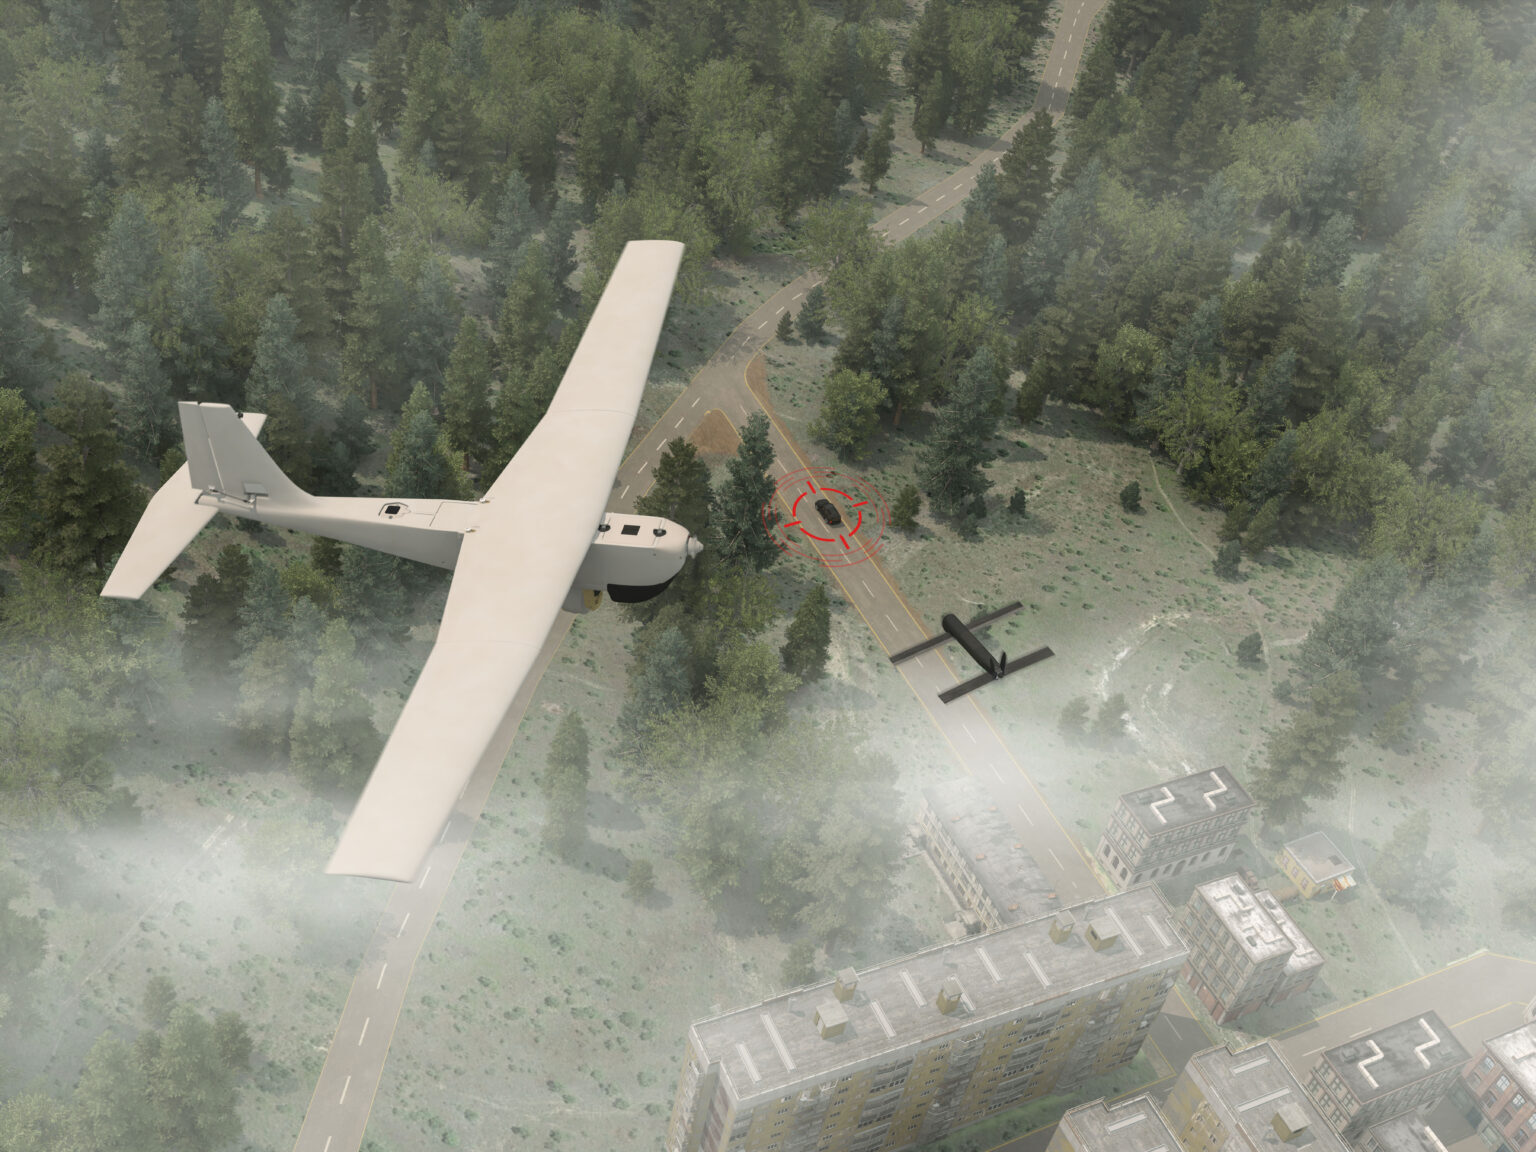 aerovironment-released-an-alternate-navigation-system-called-puma-visual-navigation-system-to-allow-